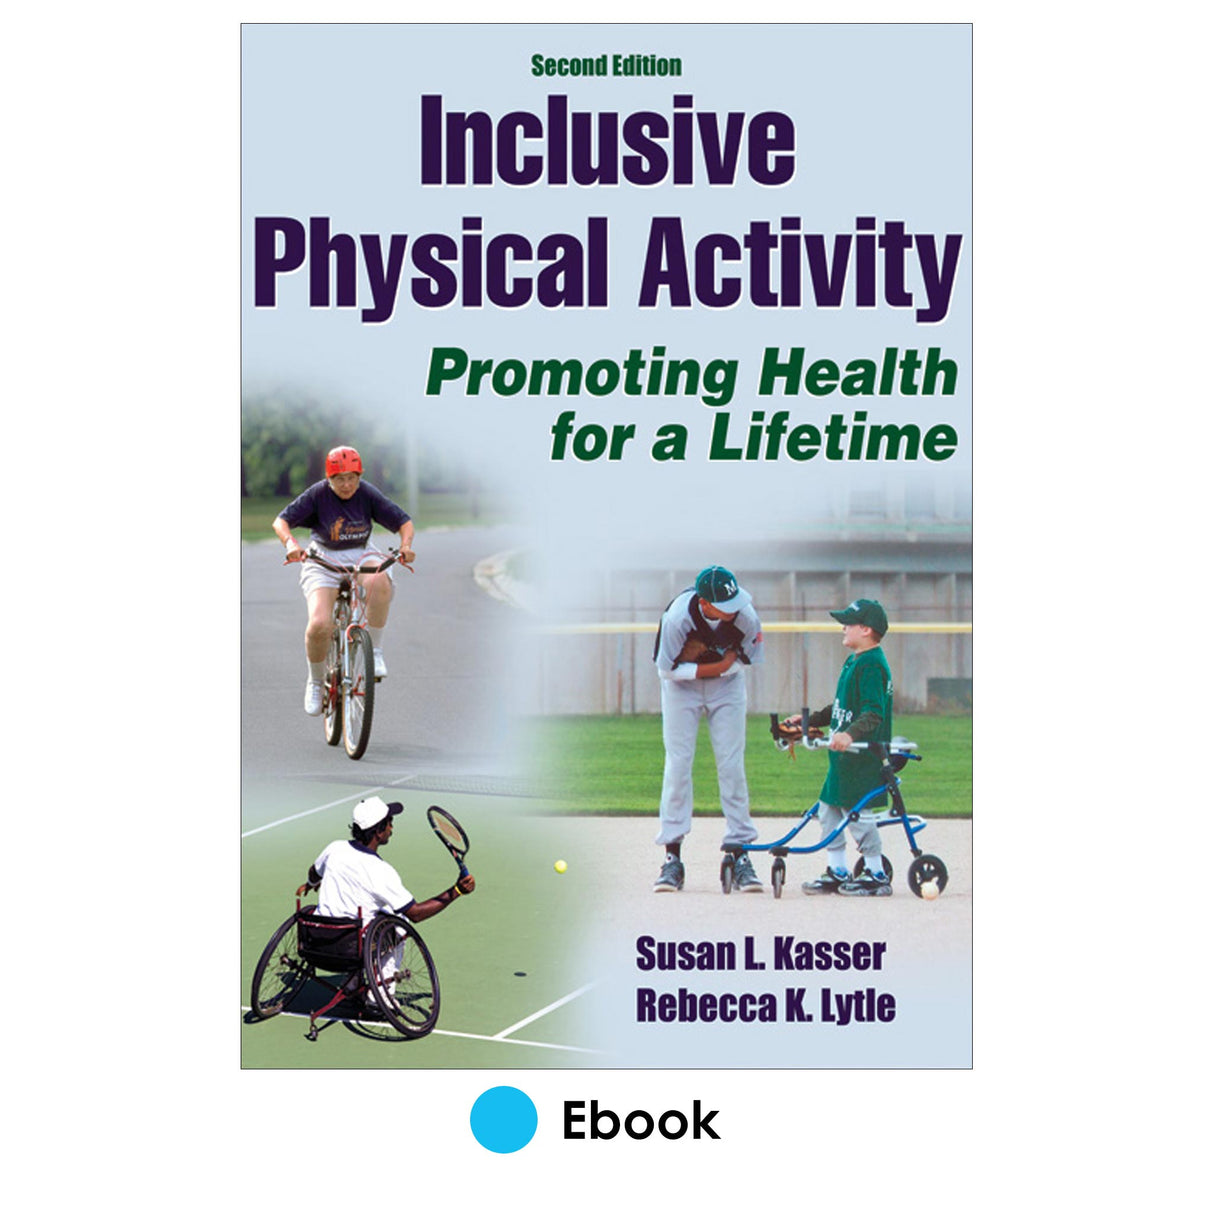 Inclusive Physical Activity 2nd Edition PDF